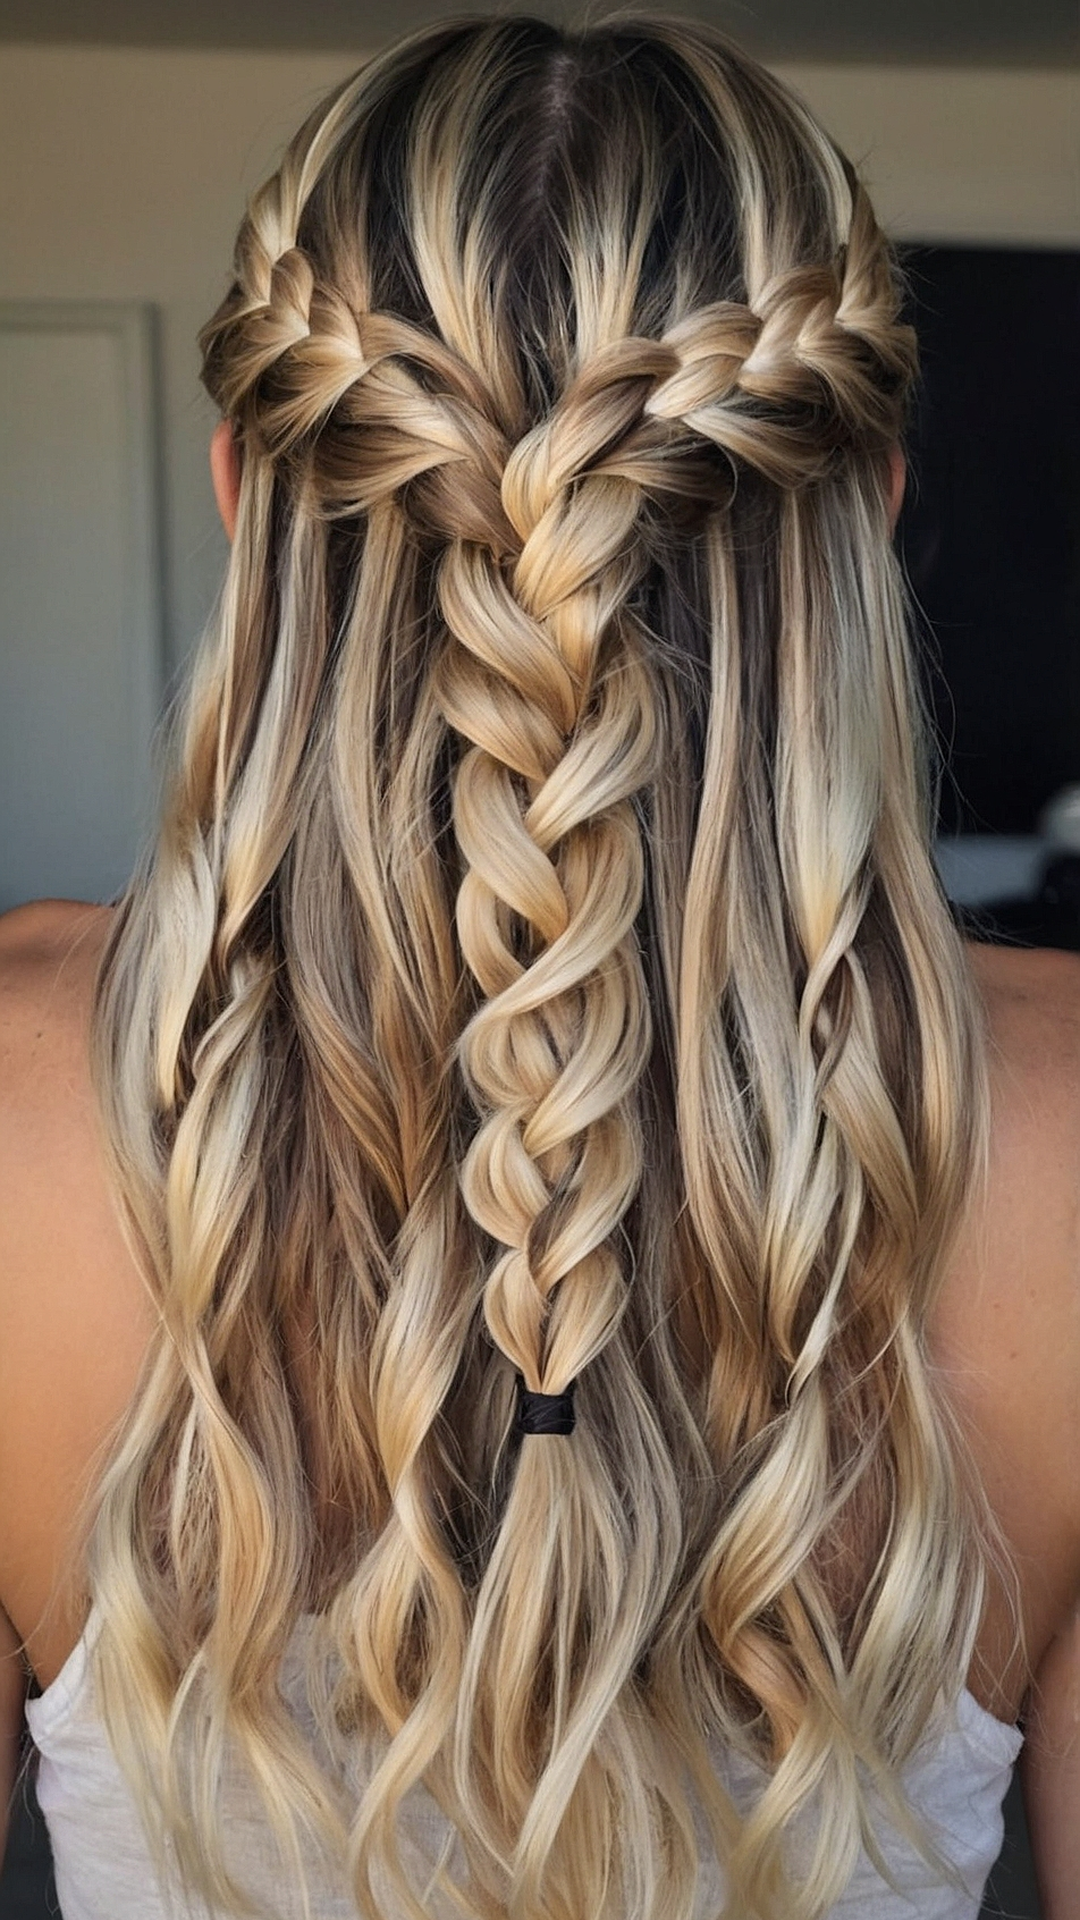 Tress Trends: Pretty Braided Hairstyle Ideas